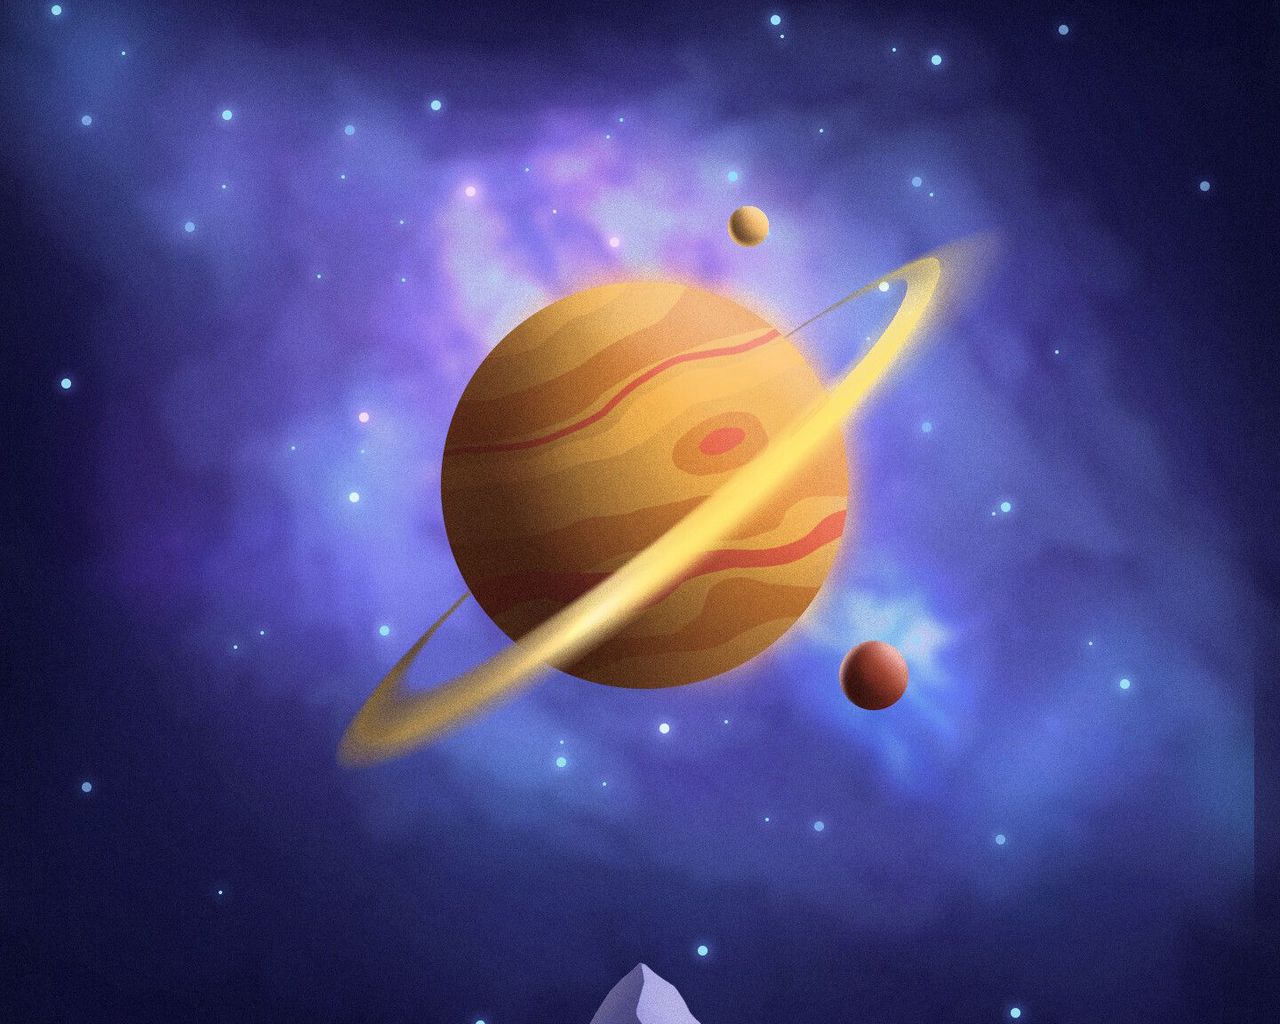 Planet And Mountains Artistic Wallpapers